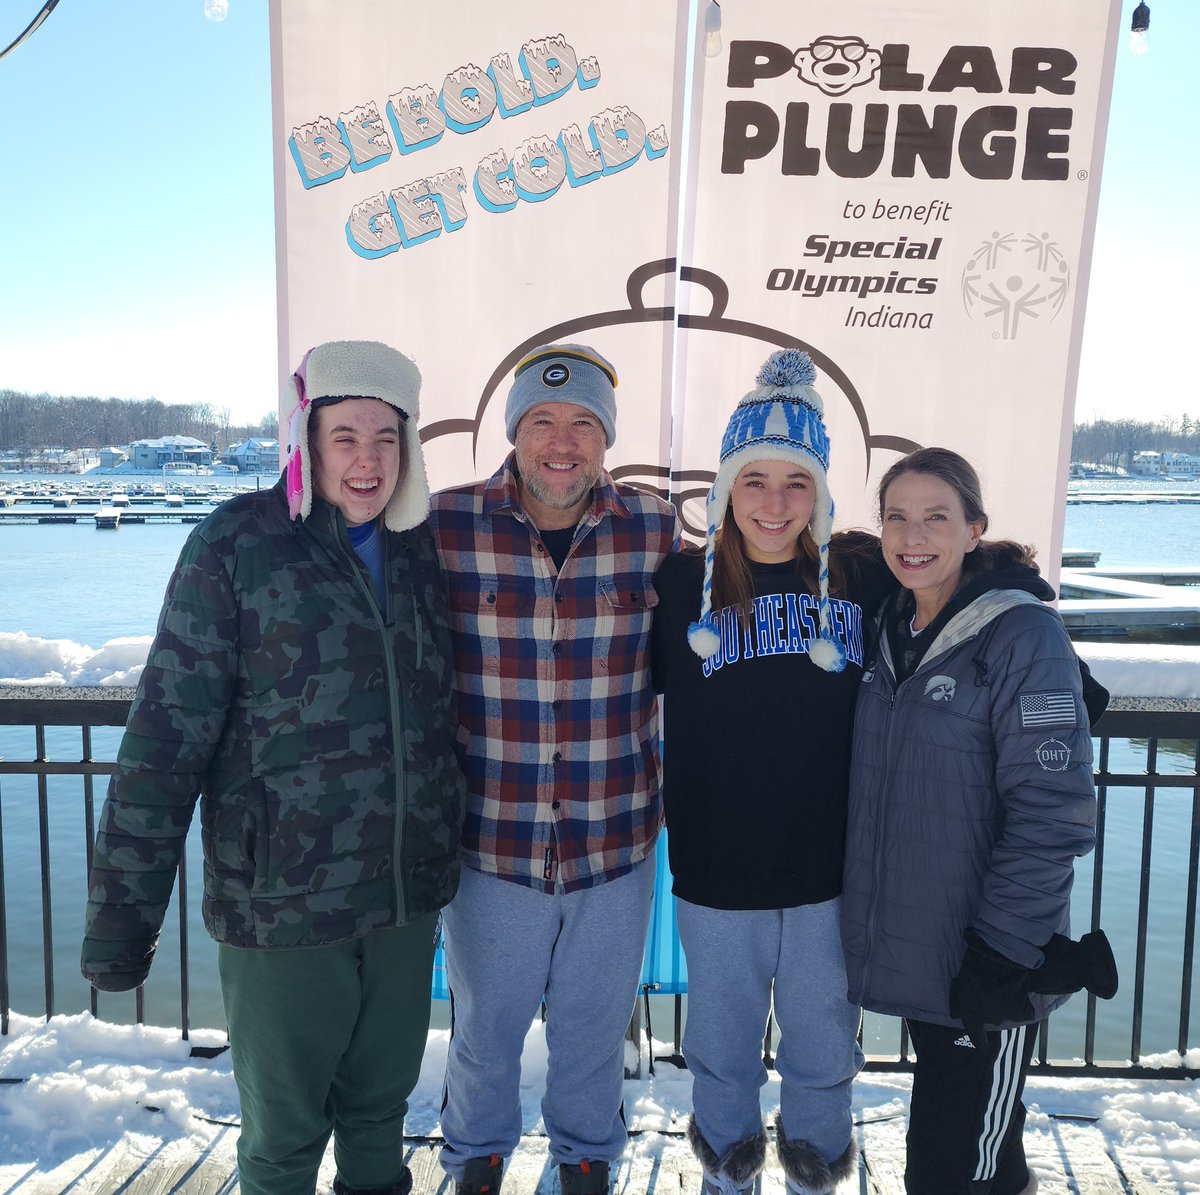 Raised over 400 bucks today for the @SOIndiana today. Proud of my 2 girls polar plunging in 20 degree weather. Thx to @WolfiesGrill for having us at your location. Great unified sports programs from @HSEAthletics and @FHSTigers representing.